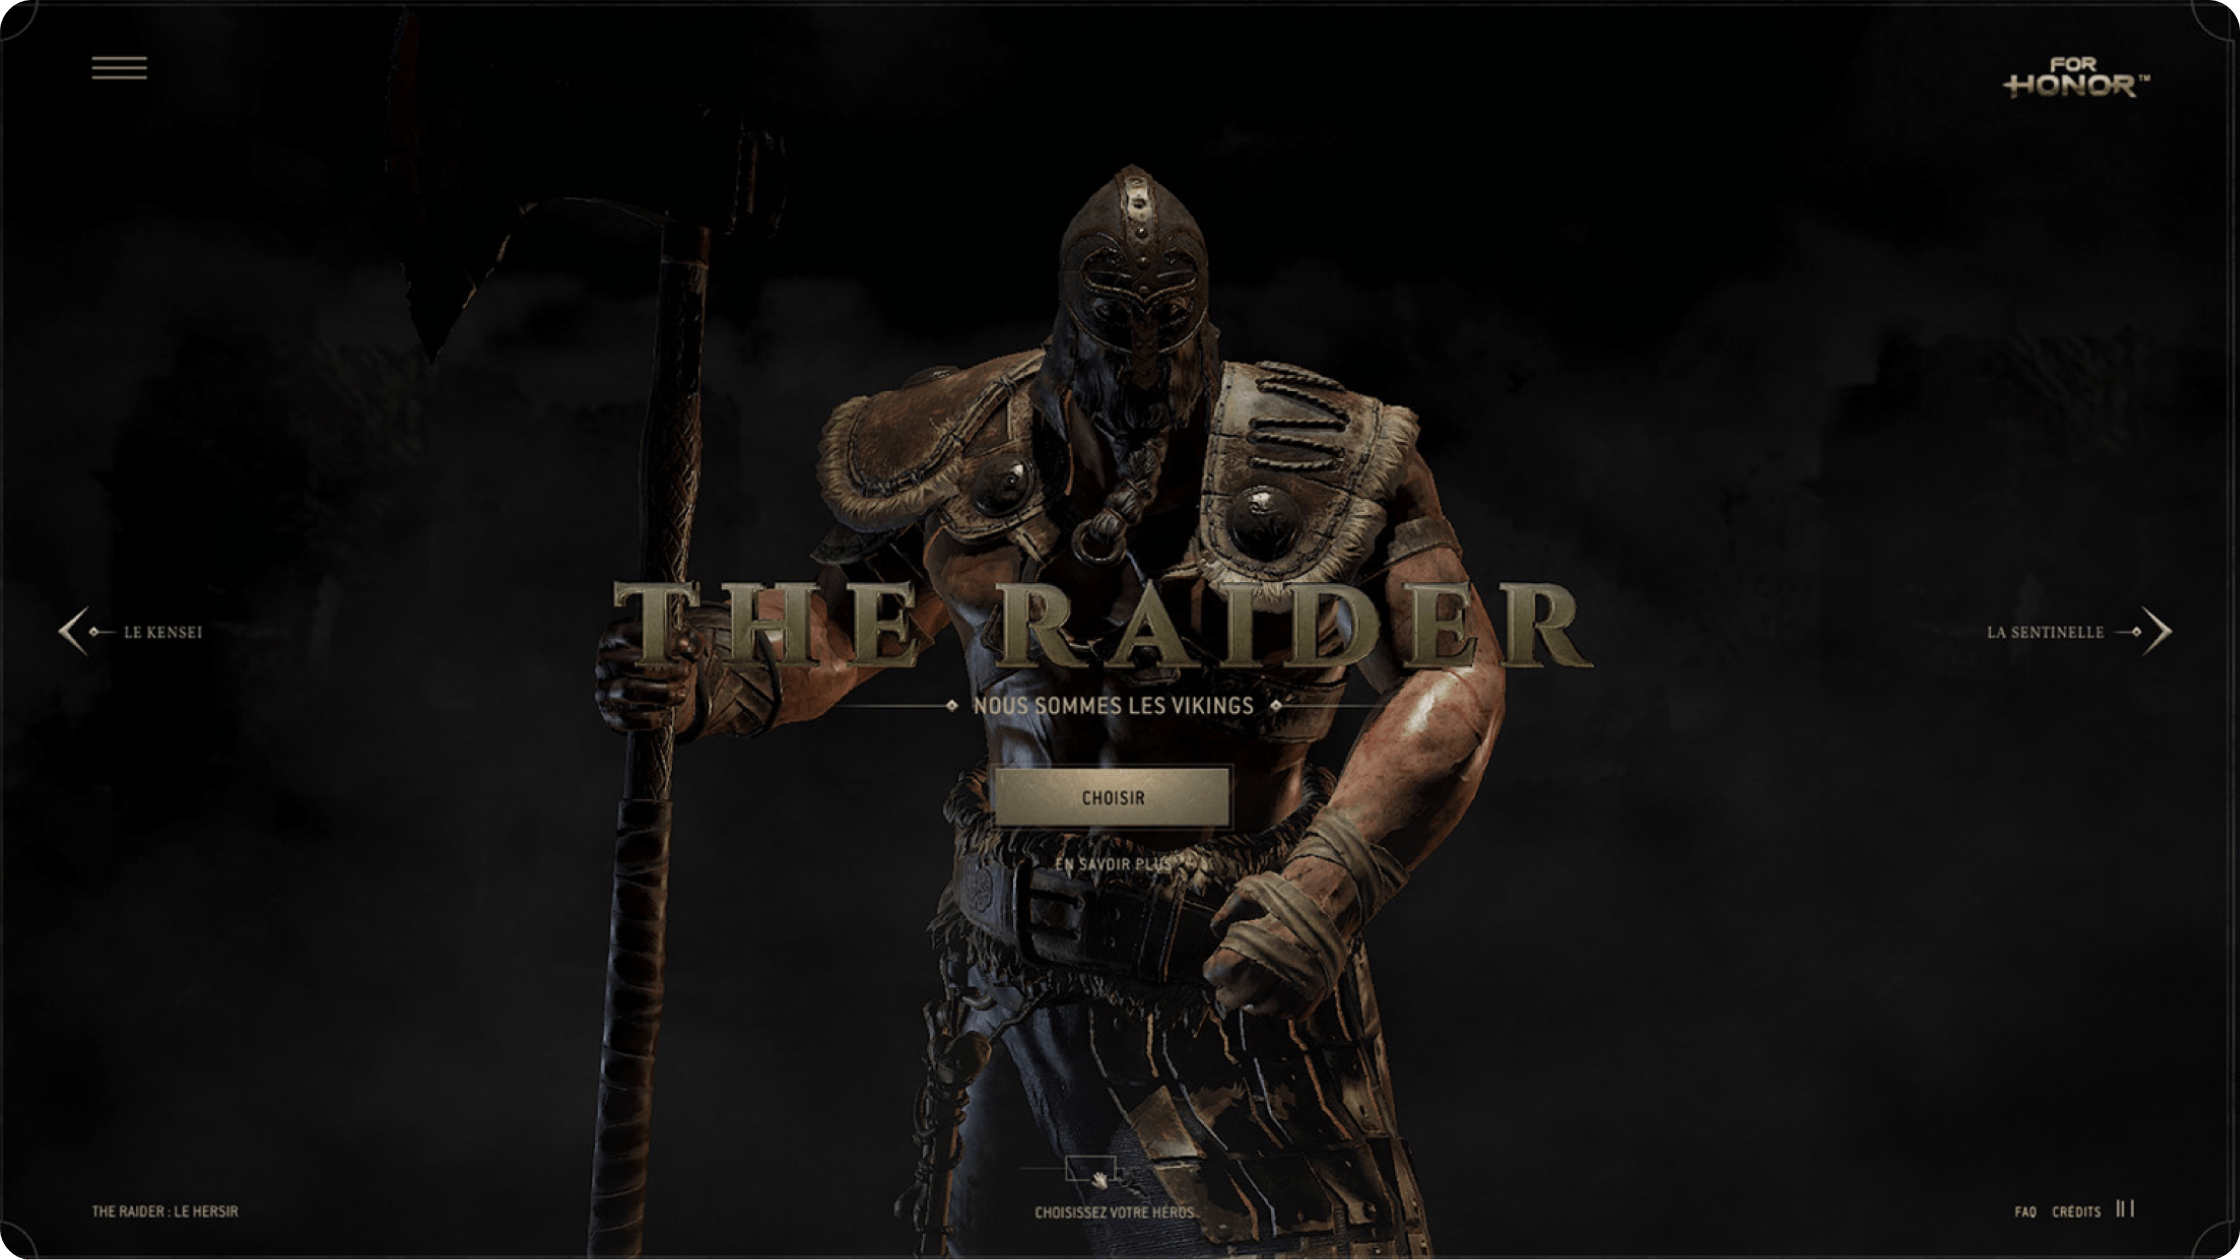 Extract of the website : The Raider